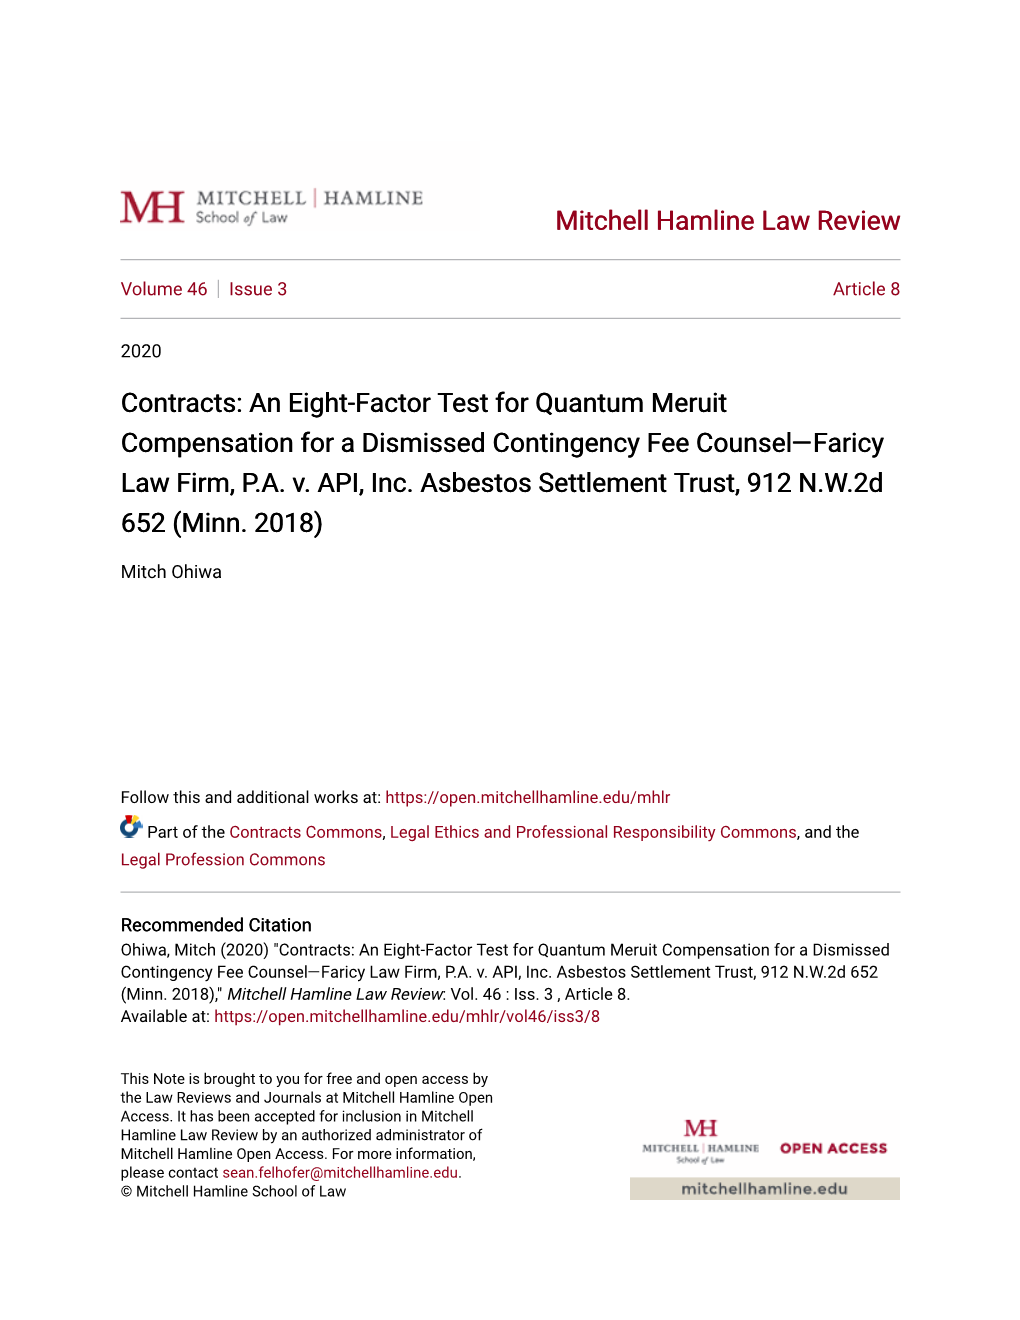 Contracts: an Eight-Factor Test for Quantum Meruit Compensation for a Dismissed Contingency Fee Counsel—Faricy Law Firm, P.A